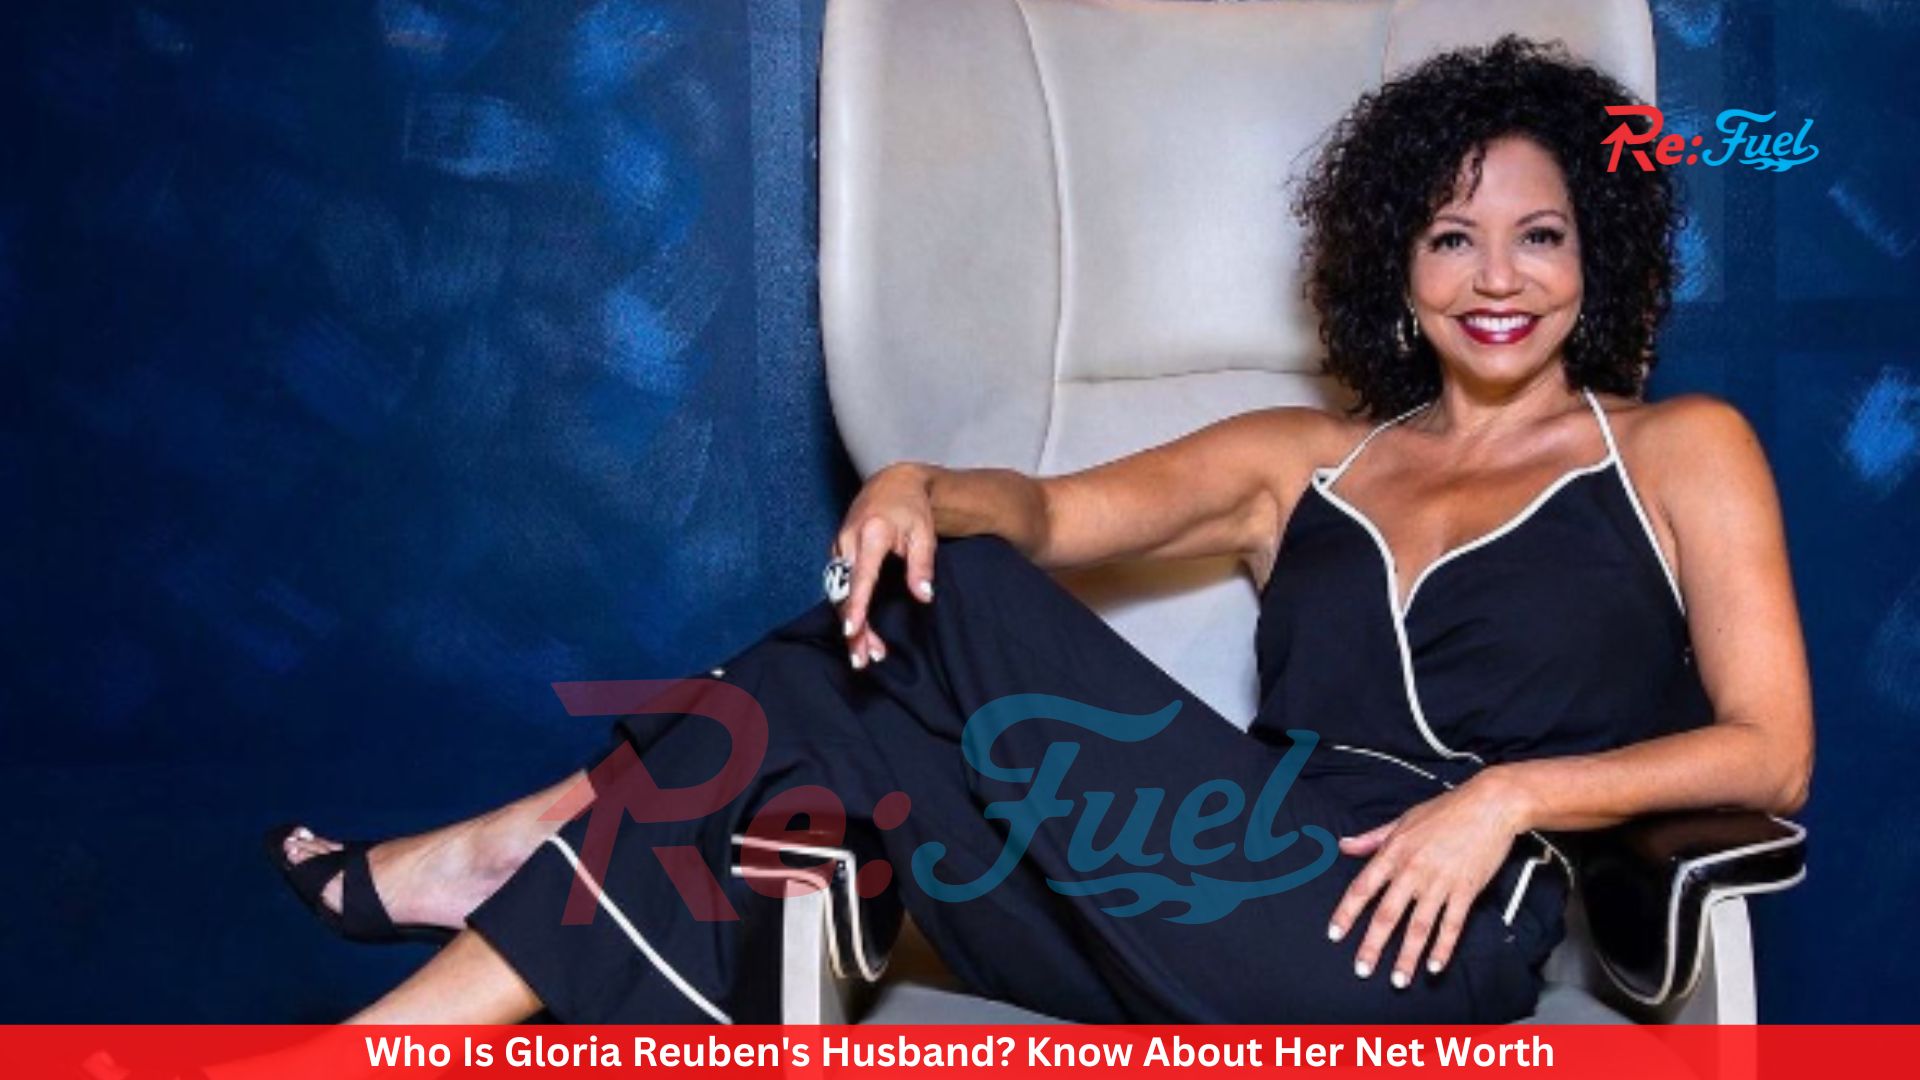 Who Is Gloria Reuben's Husband? Know About Her Net Worth